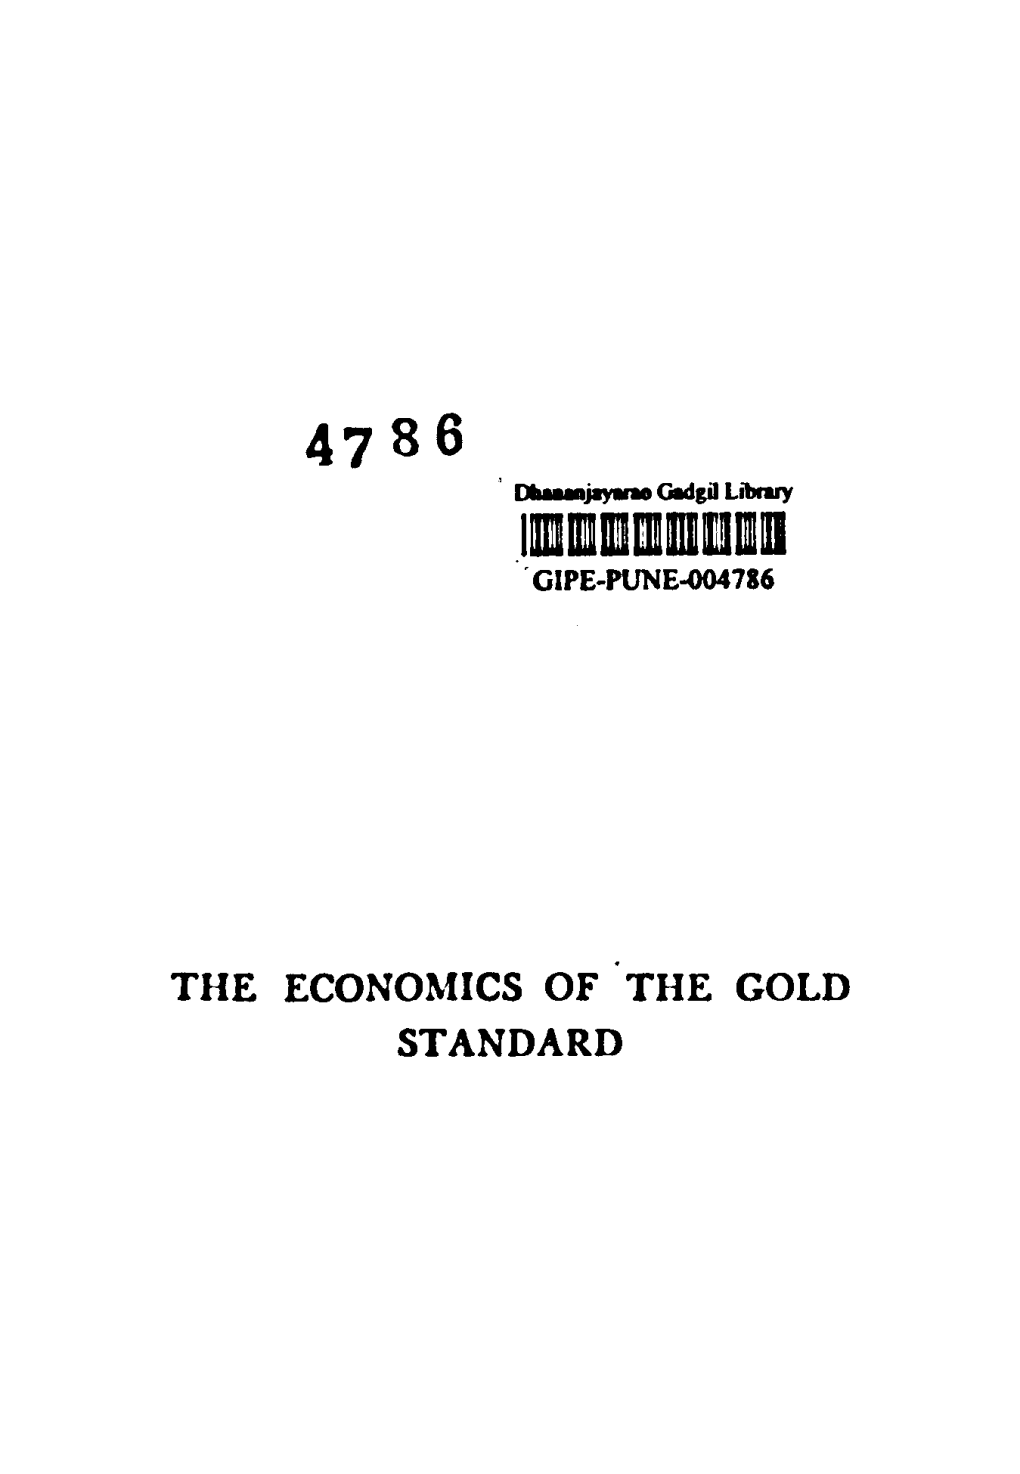 The Economics of the Gold Standard the Economics of the Gold Standard